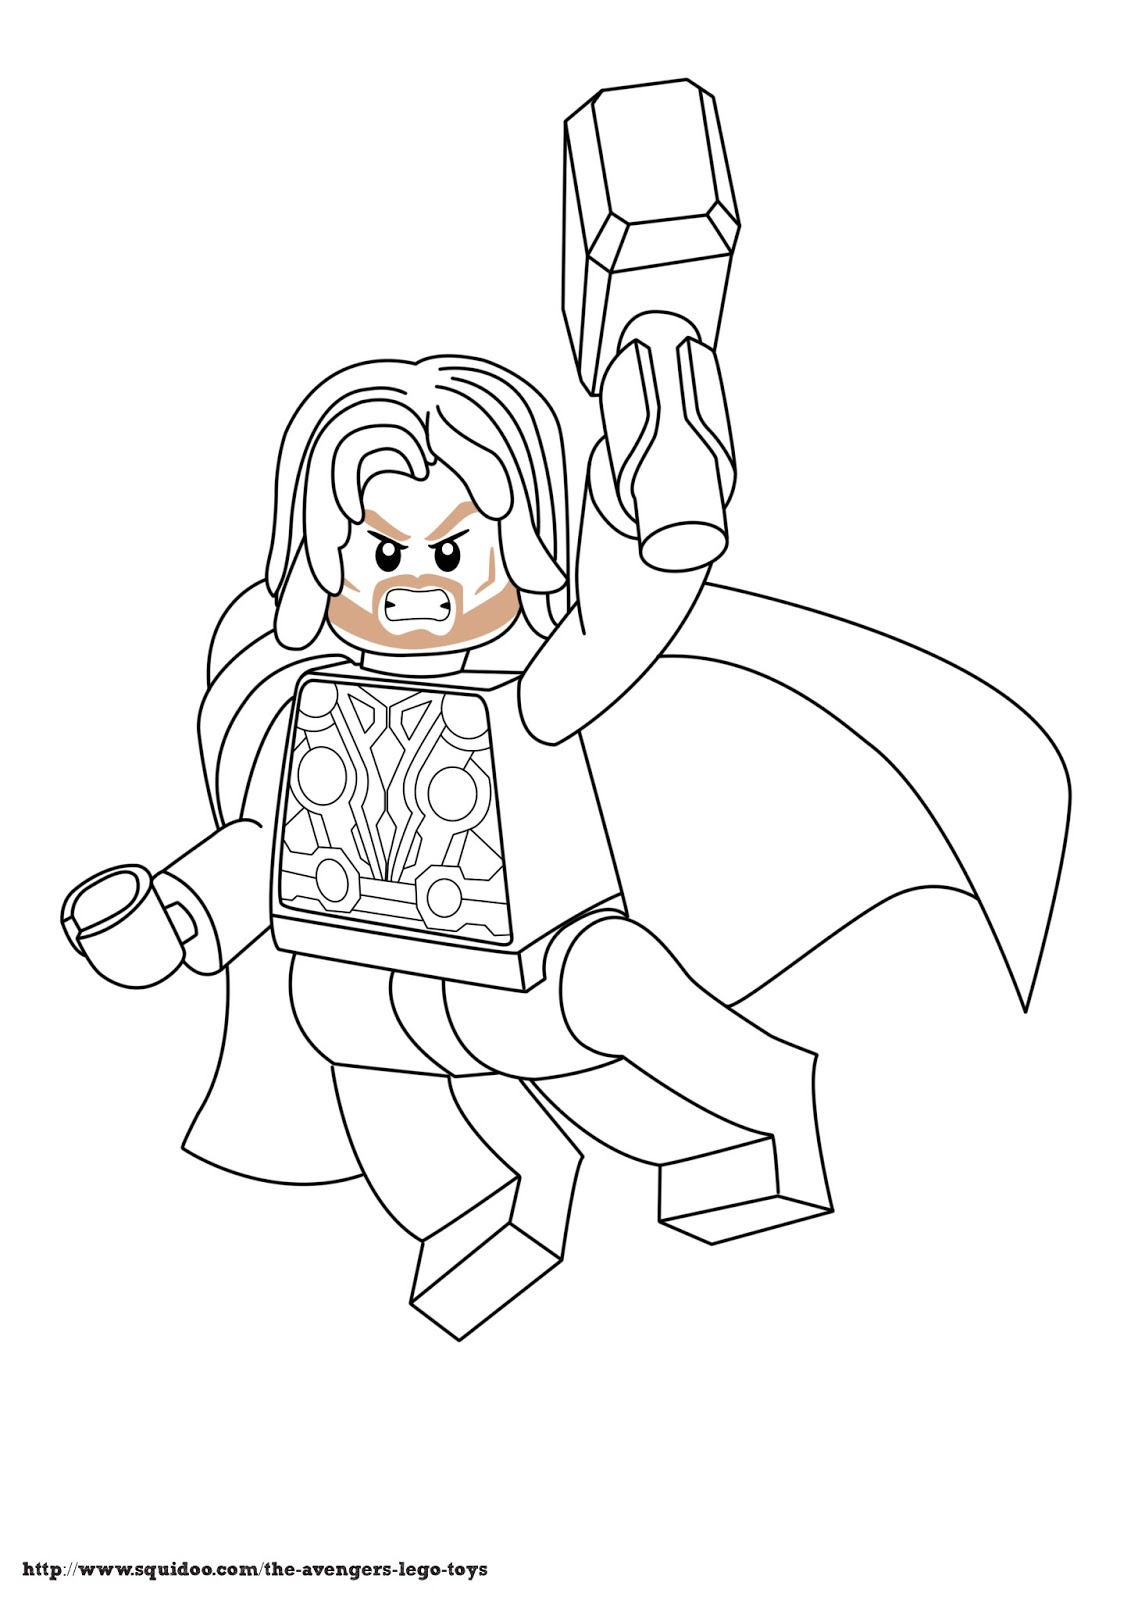 Lego Avengers Coloring Pages at Free